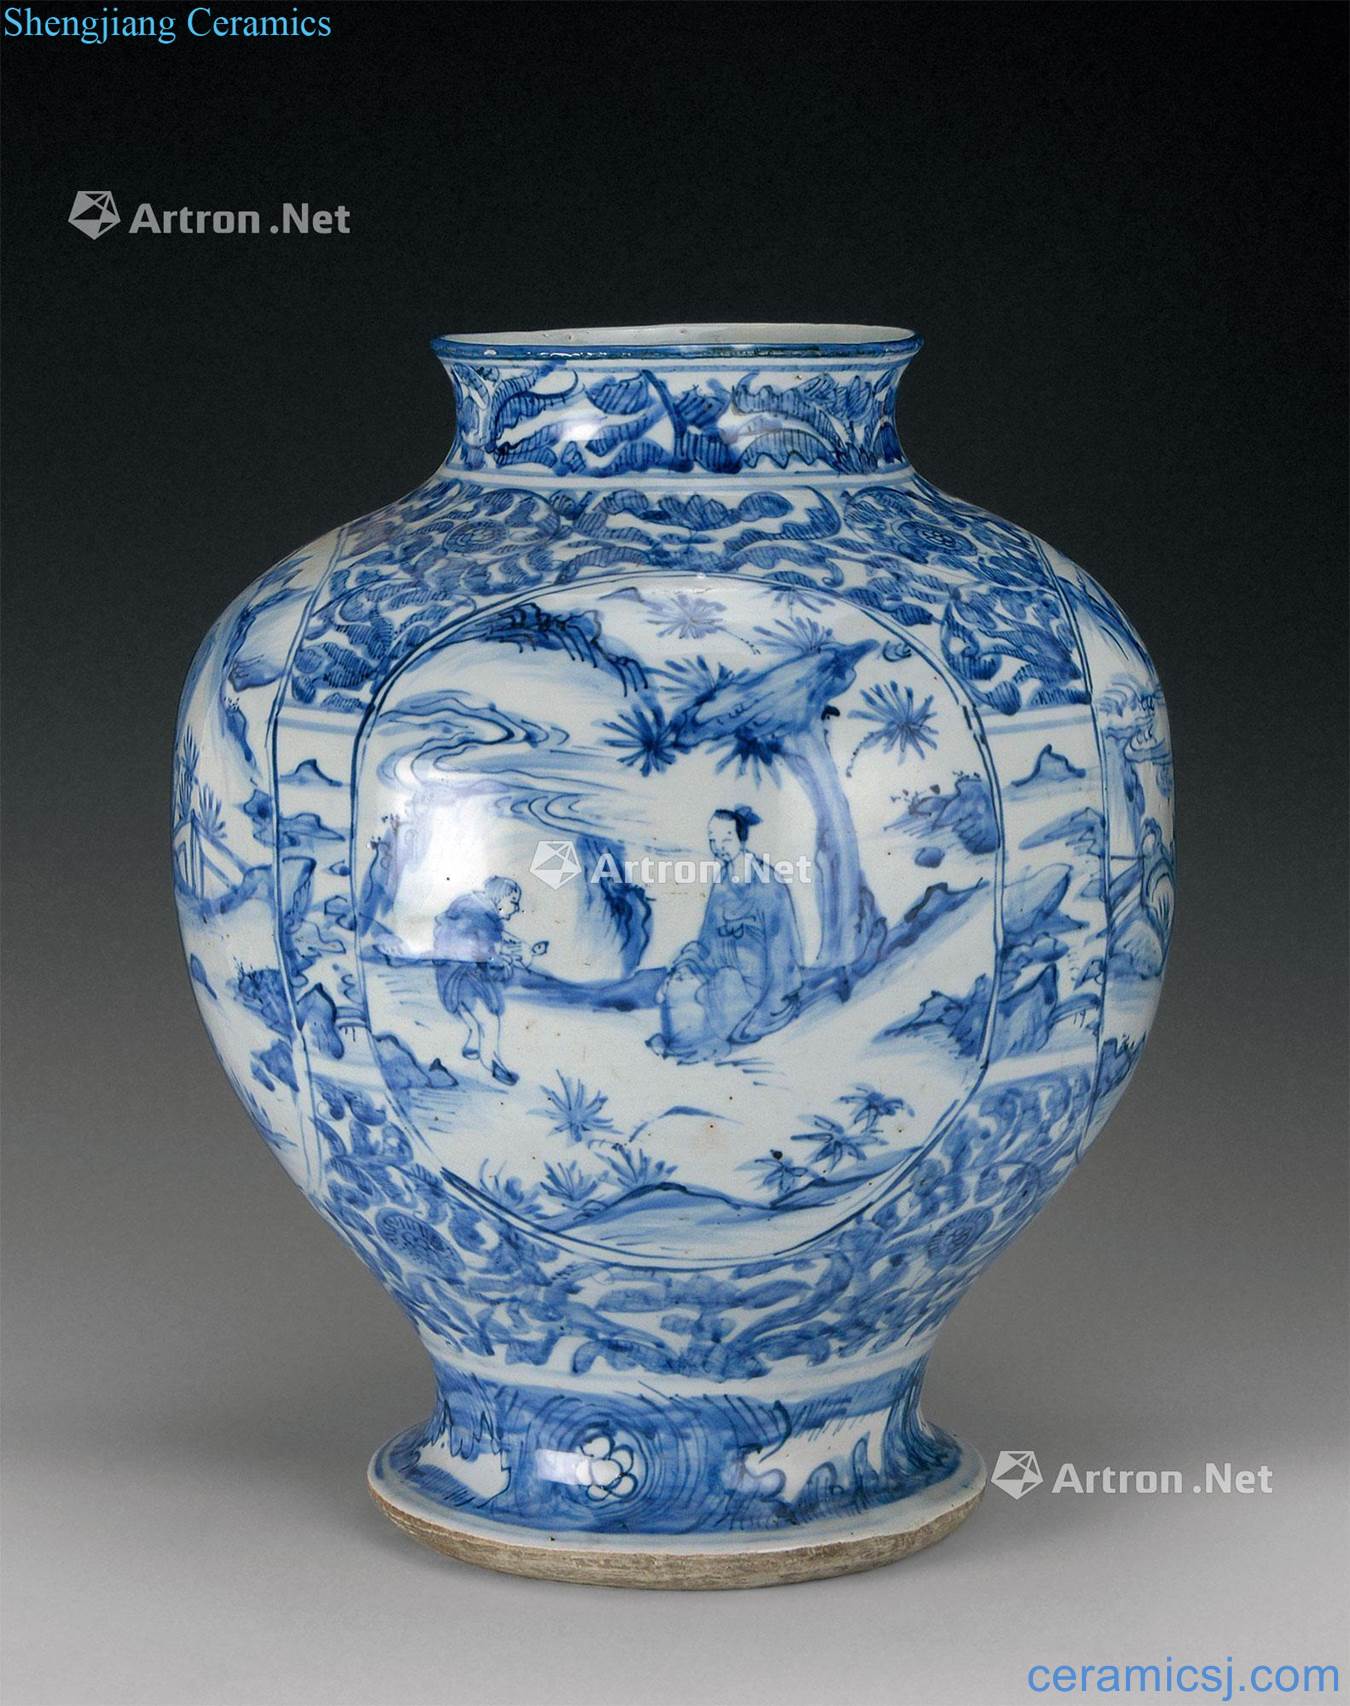 In the Ming dynasty (1368-1644) blue and white medallion Gao Shiwen bottles